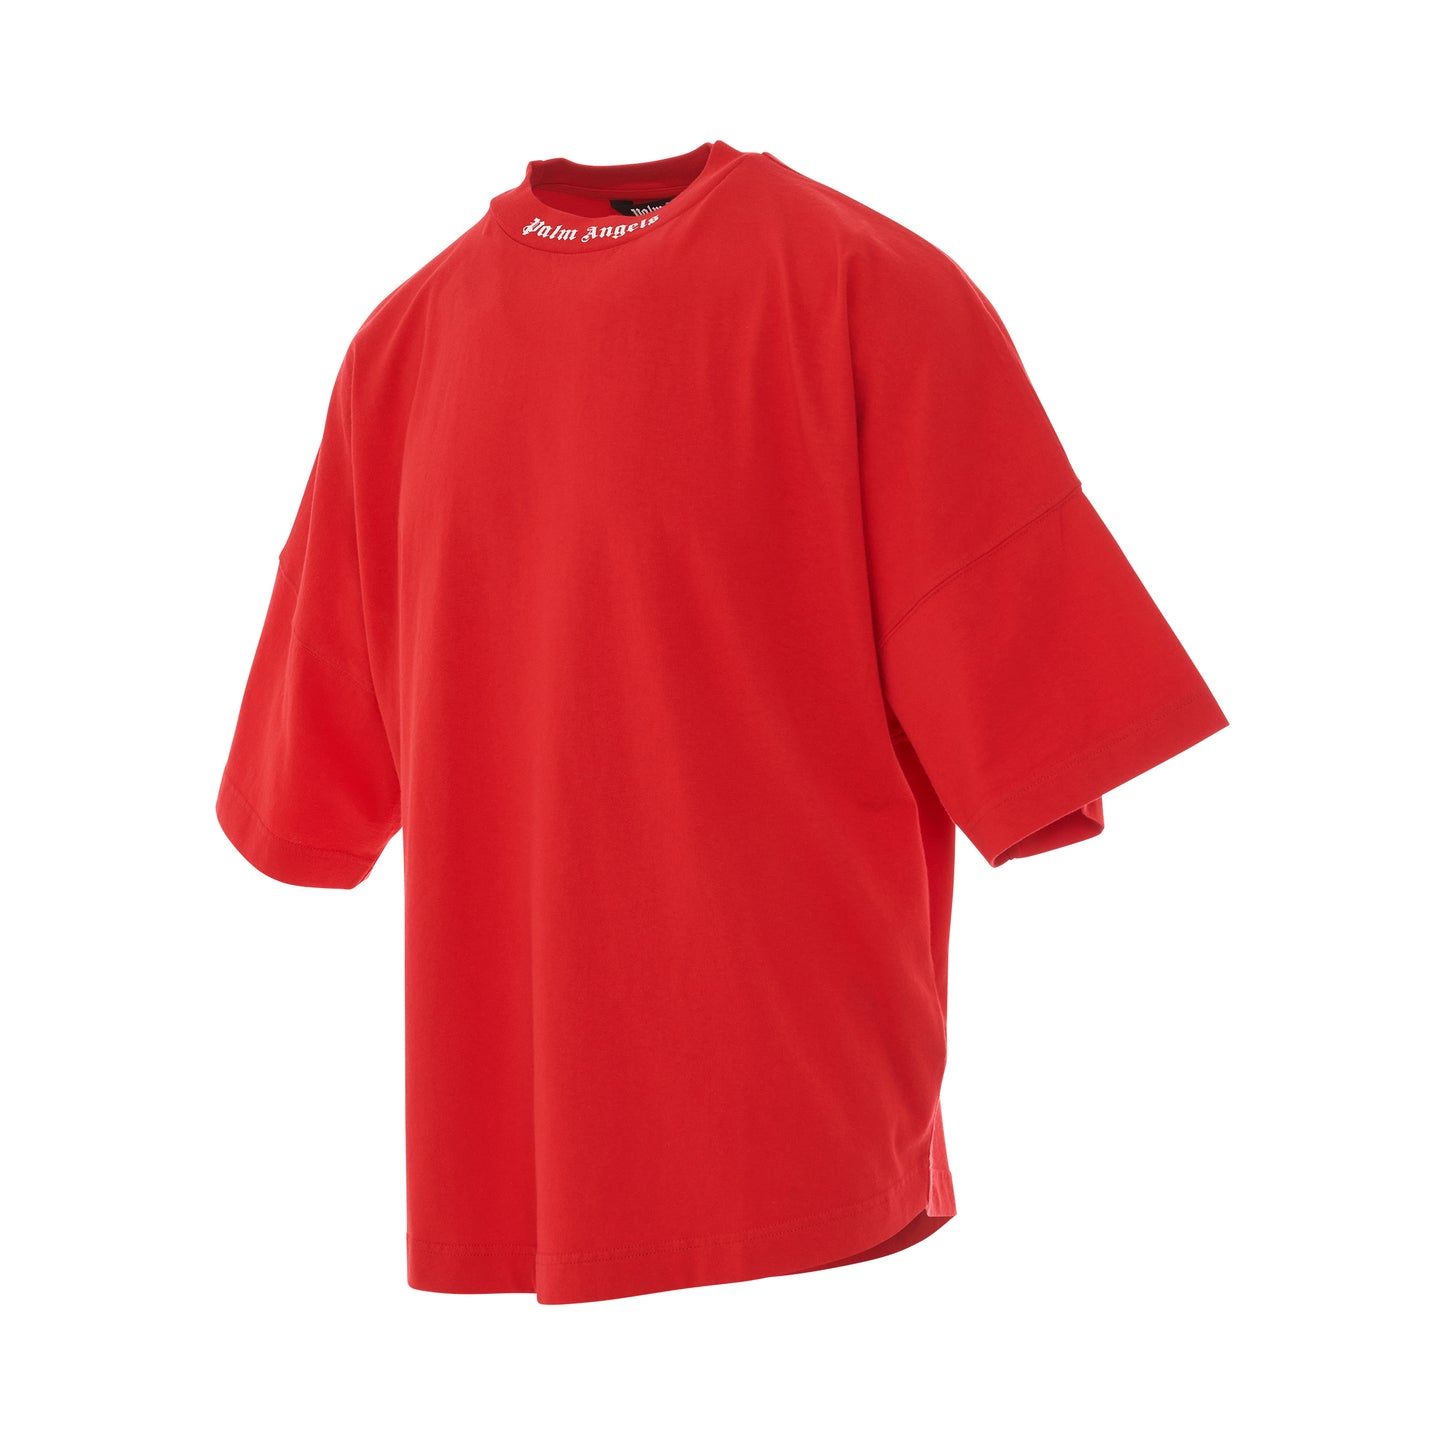 Classic Print Logo Over T-Shirt in Red/White